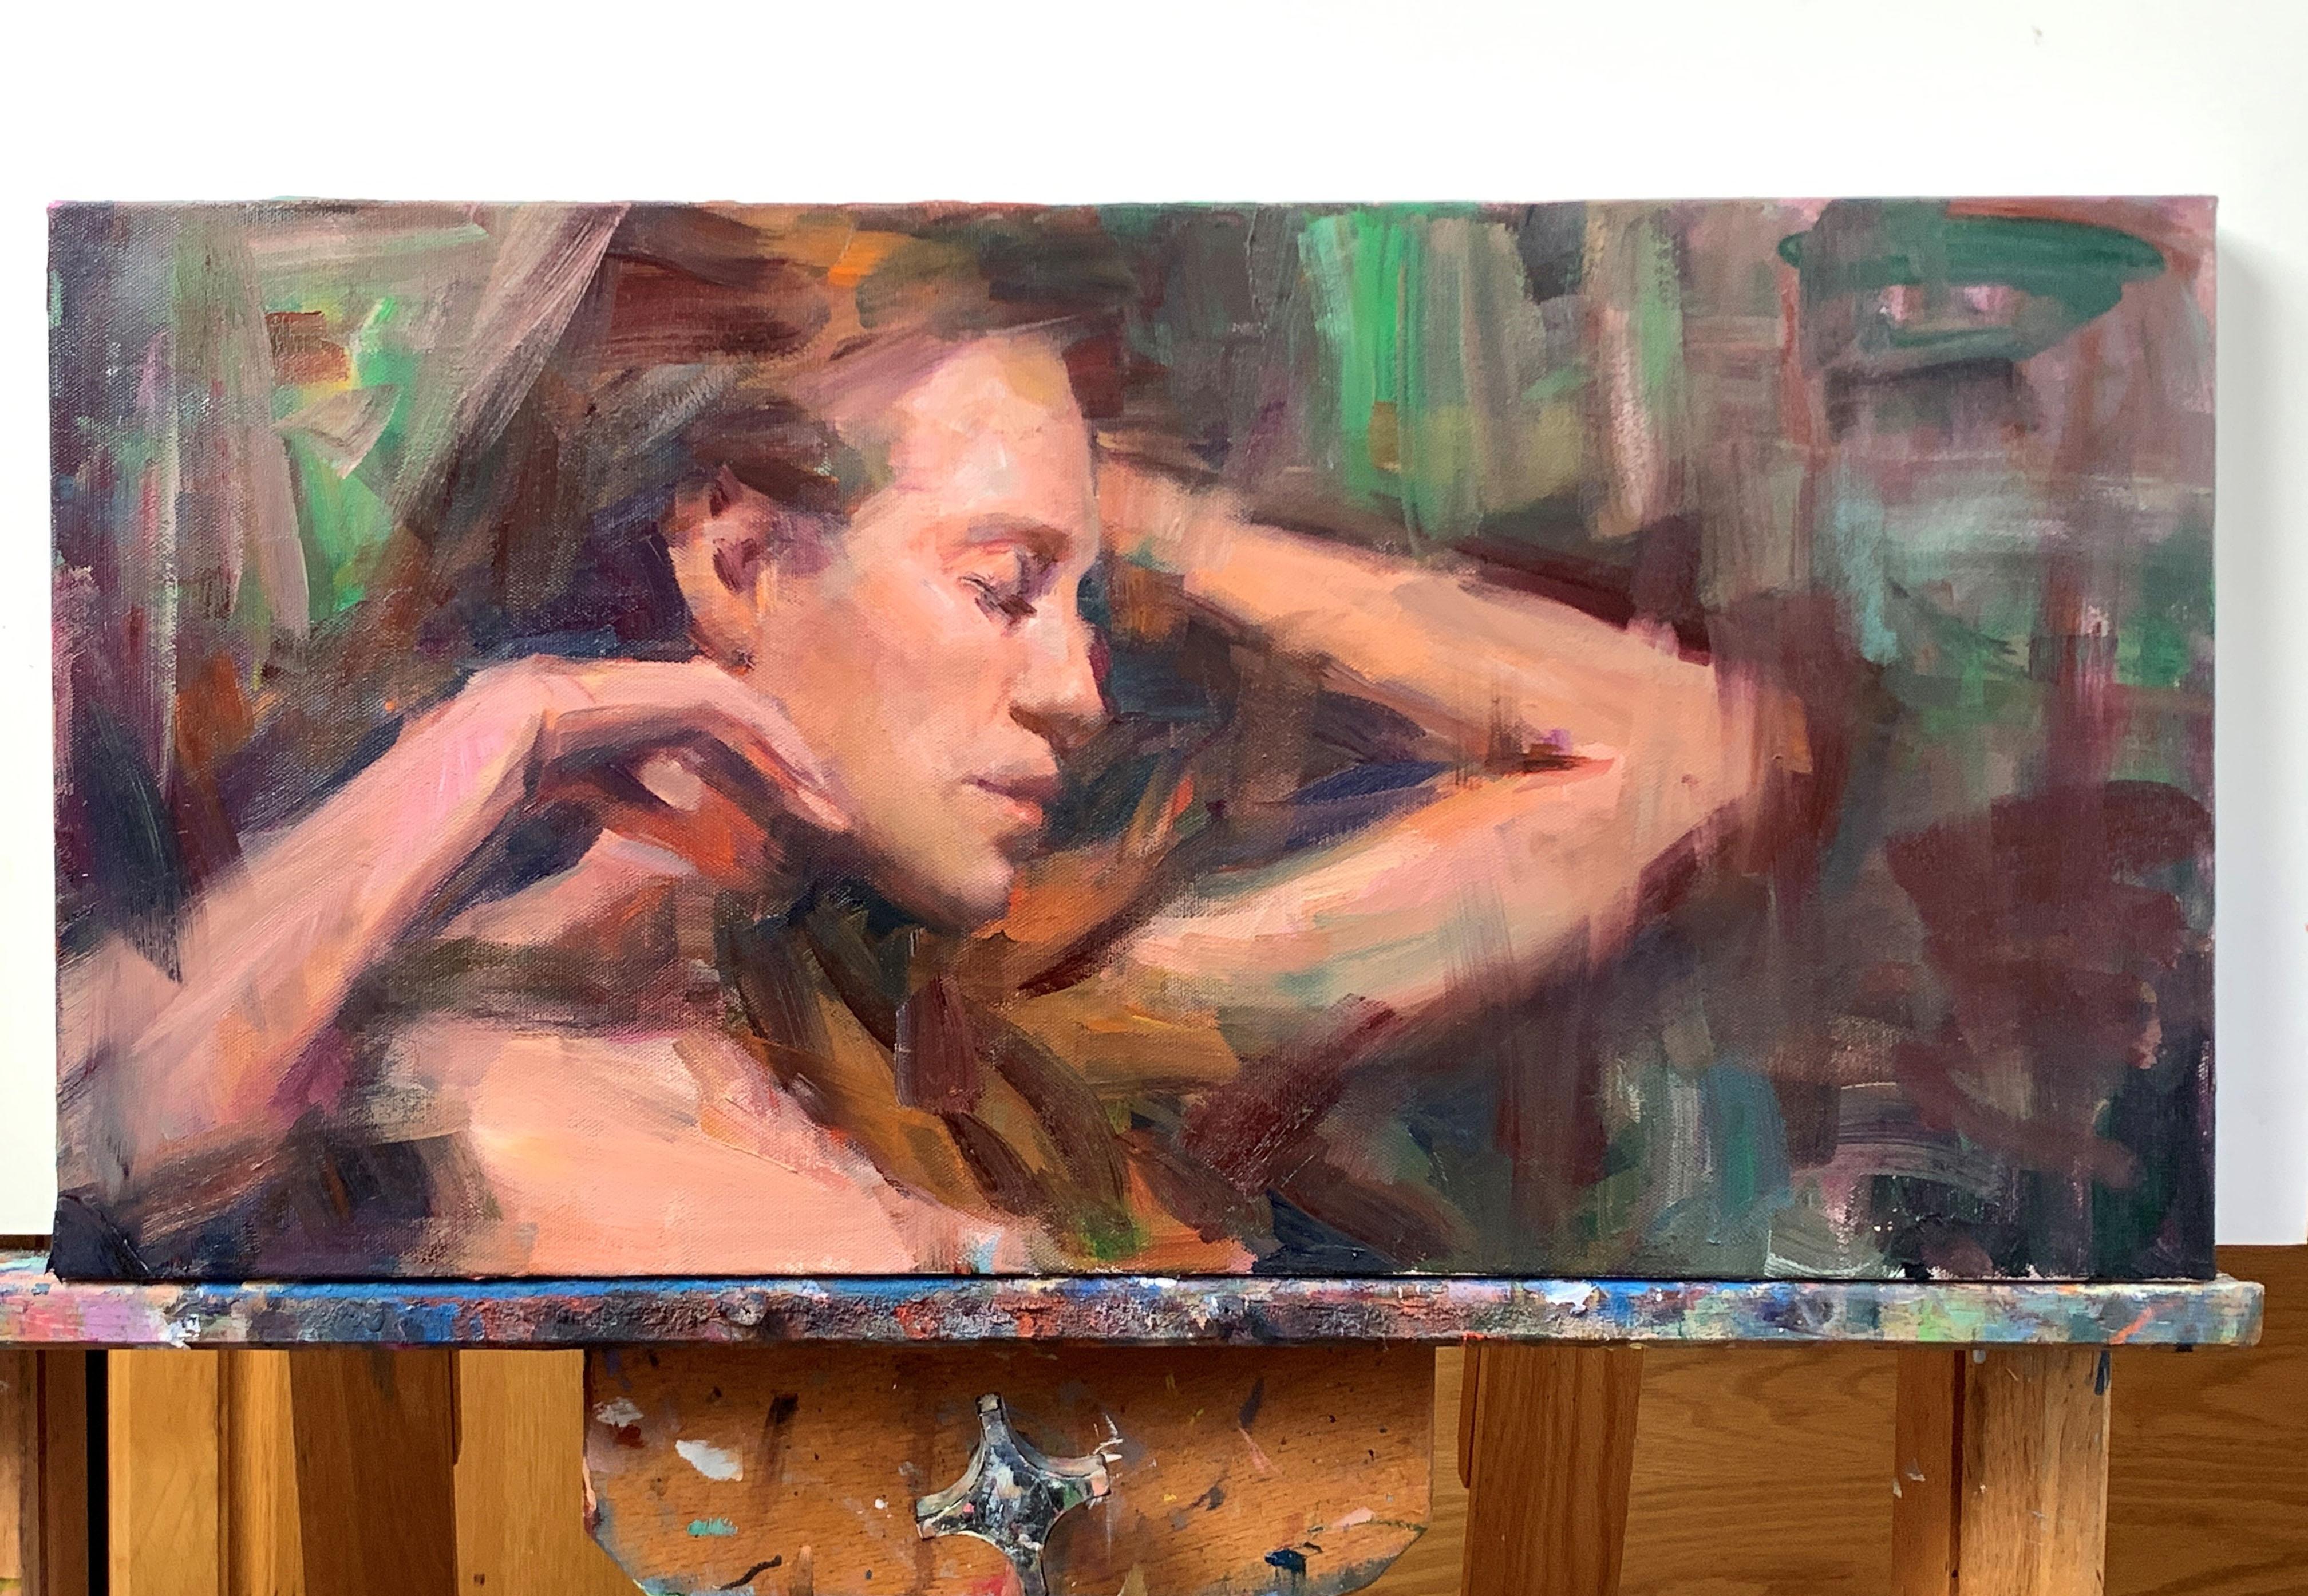 <p>Artist Comments<br>A delicate portrait of a young woman by artist Jerry Salinas. With bold painterly strokes, Jerry combines a neutral abstraction with an impressionistic nude. He utilized different shades of brown and green that fill the